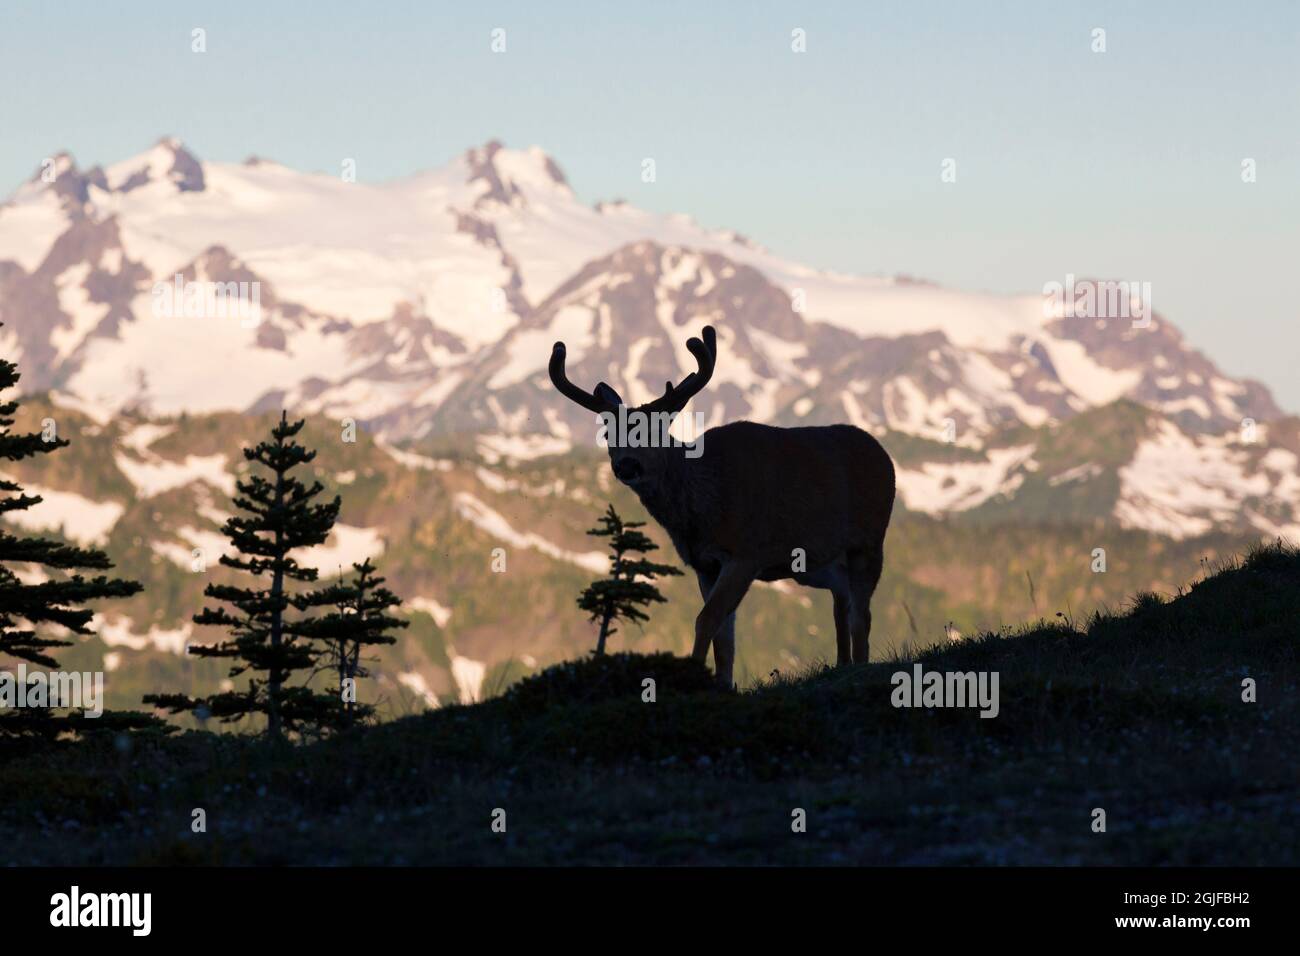 USA, Staat Washington. Olympic National Park. Silhouetted Black-tailed Bock in Samt mit Mt. Olympus im Hintergrund. Stockfoto